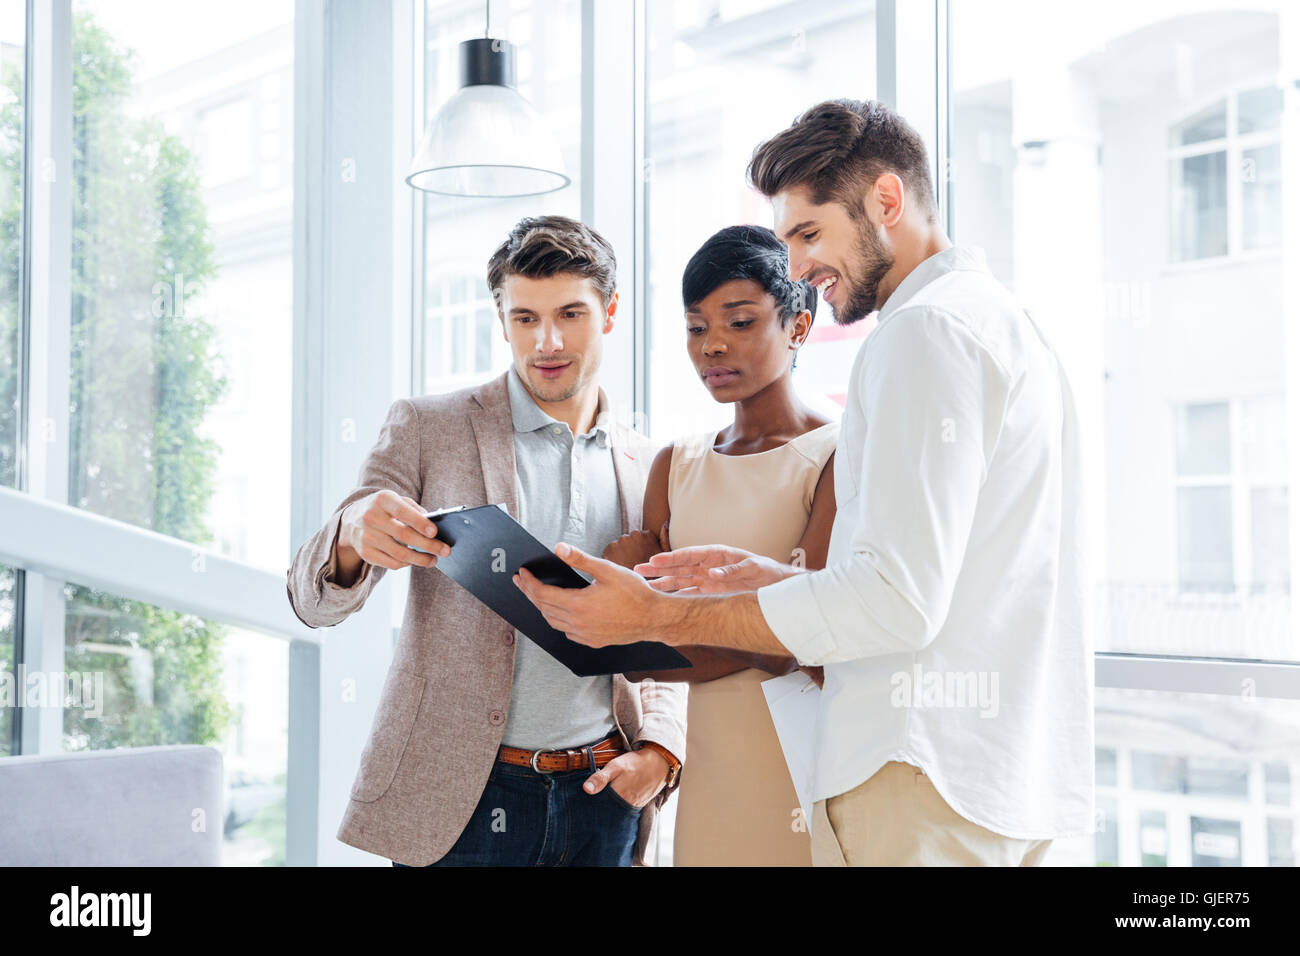 Three young business people standing and discussing business plan together in office Stock Photo